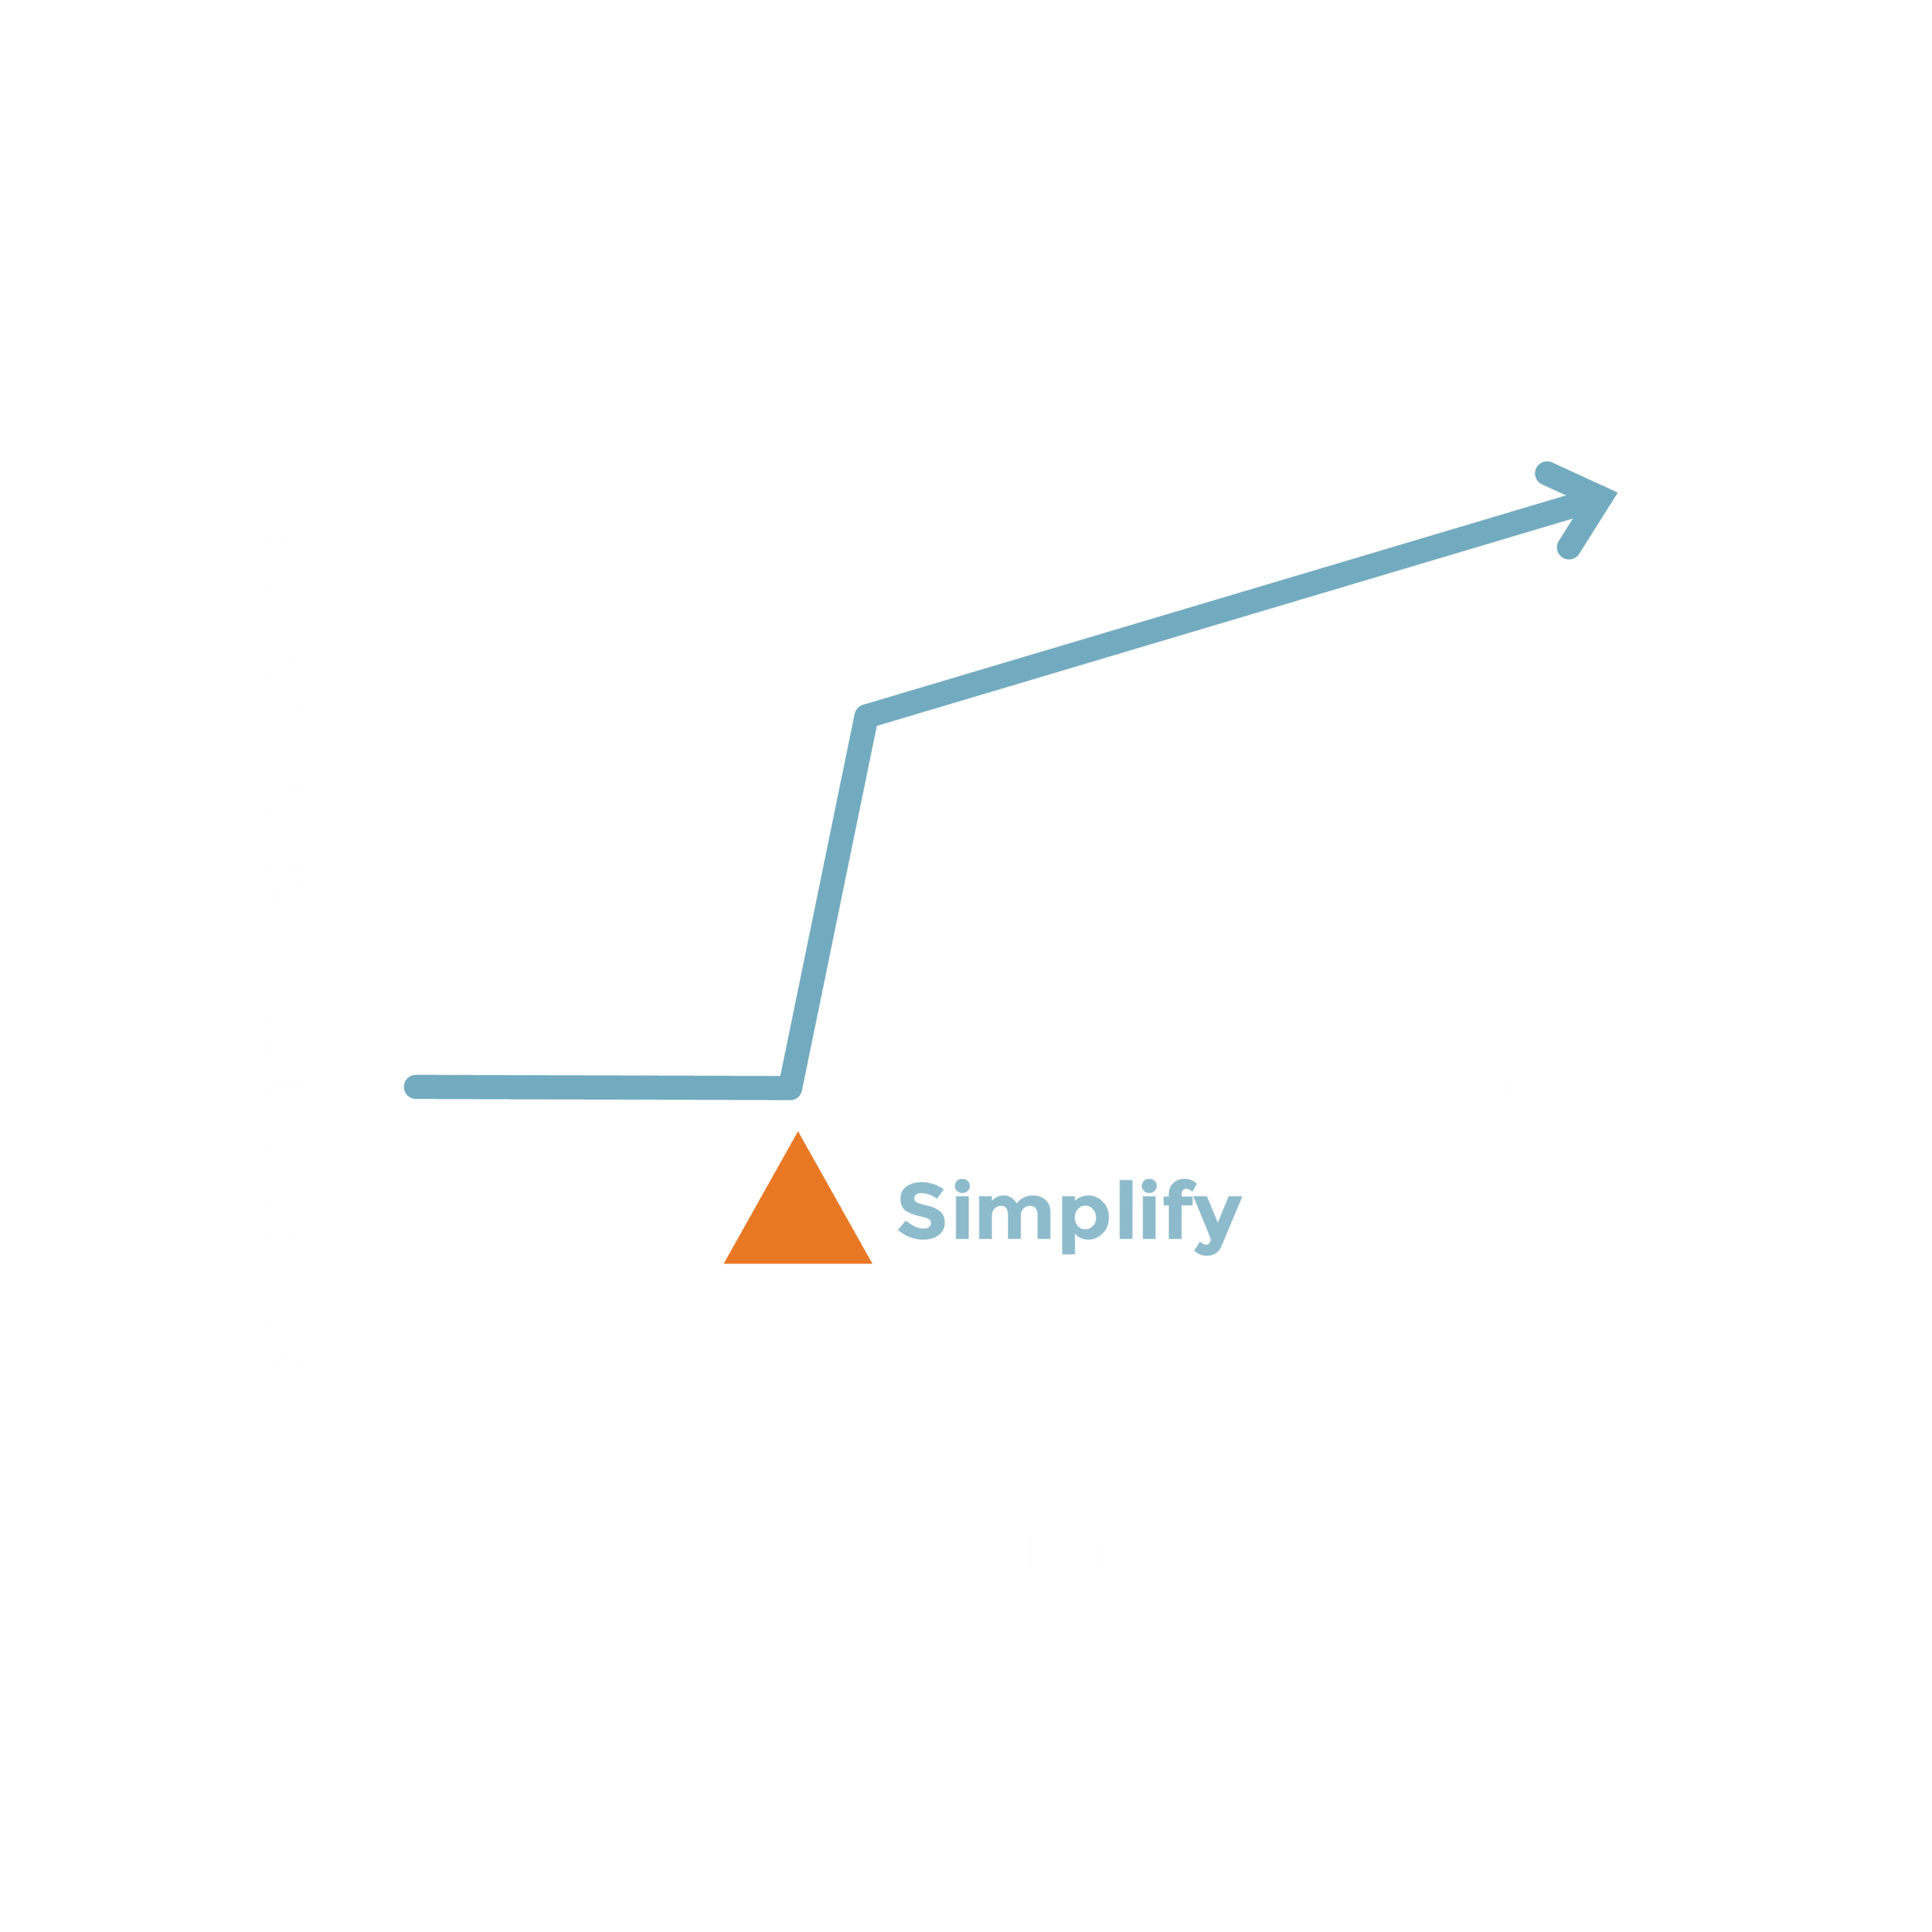 Productivity and engagement scale after SimplifyWork